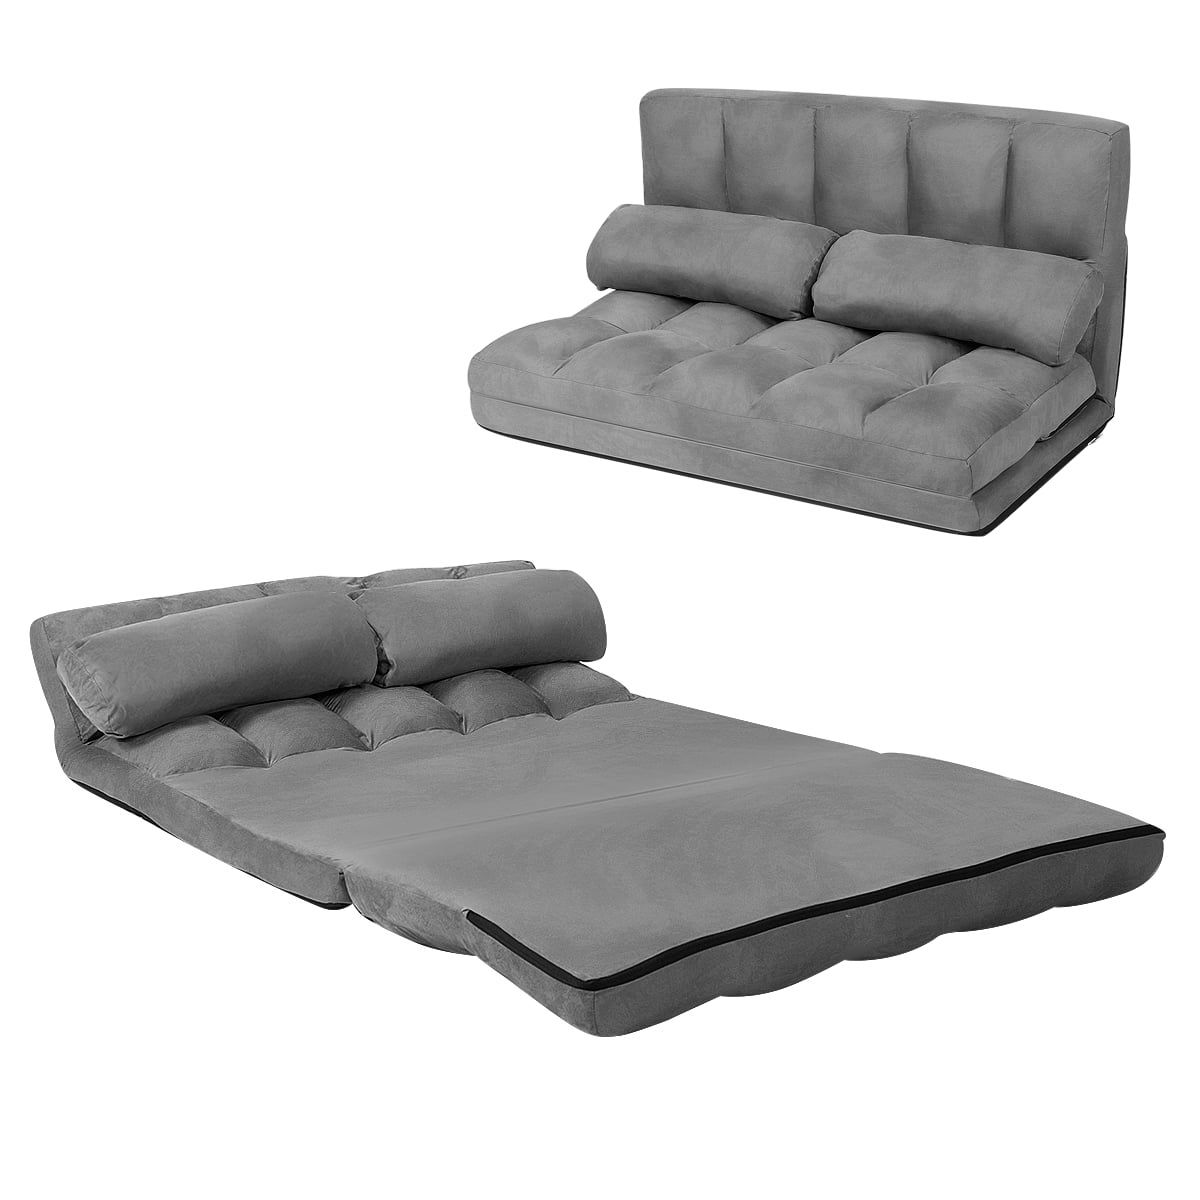 Topbuy Adjustable Floor Sofa Foldable Lazy Sofa Bed With 2 Pillows Grey Pertaining To 2 In 1 Foldable Sofas (View 18 of 20)